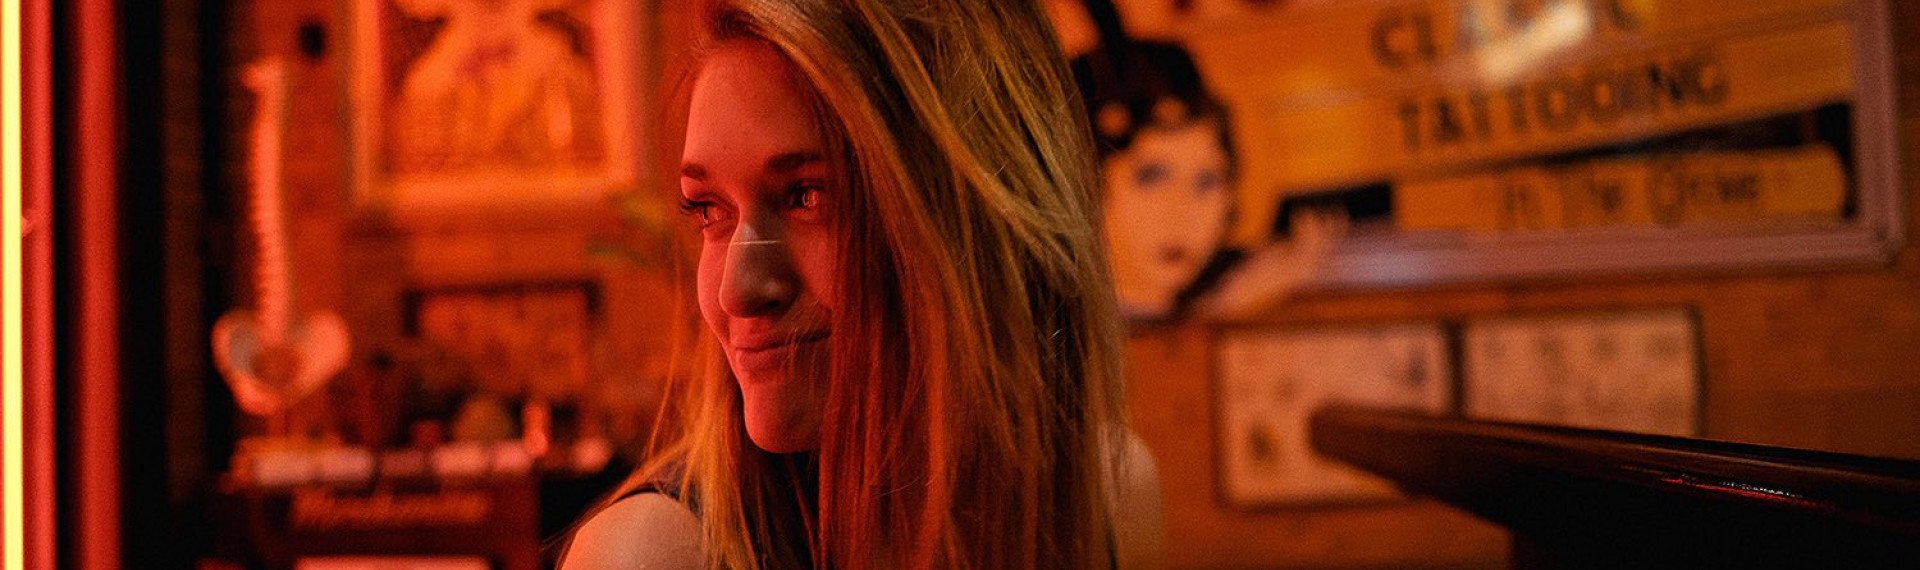 a woman giving a smirk looking off to the side in a room with dim red lights